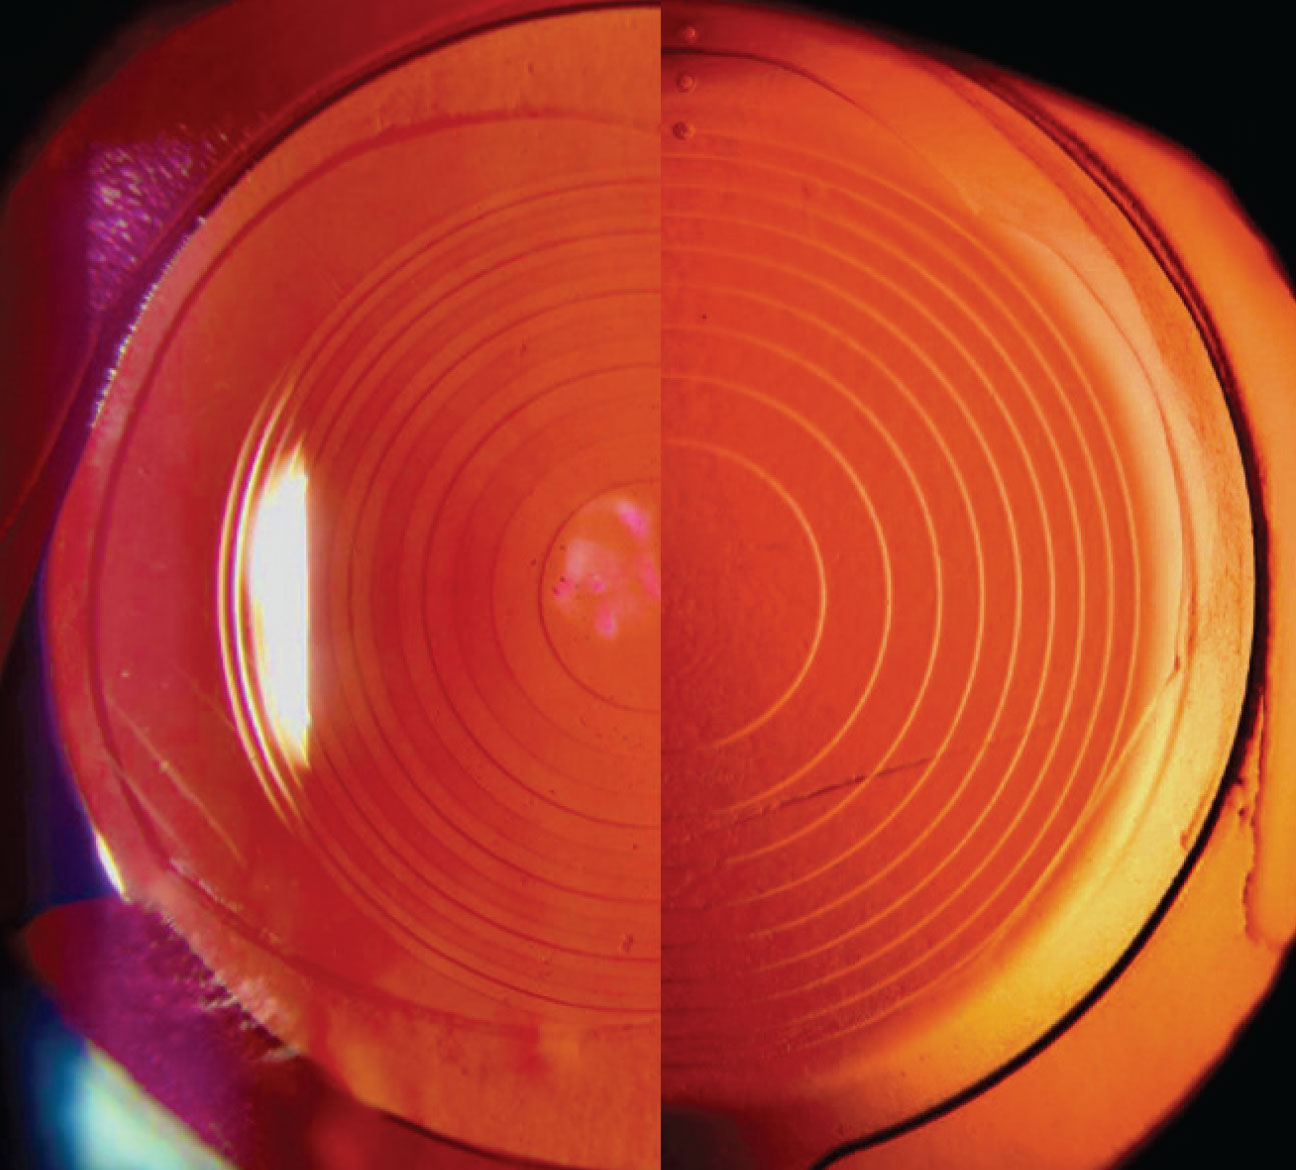 Side-by-side slit lamp view of the PanOptix (left) and the Symfony (right). The PanOptix has a smaller central optic and syncopated ring spacing.